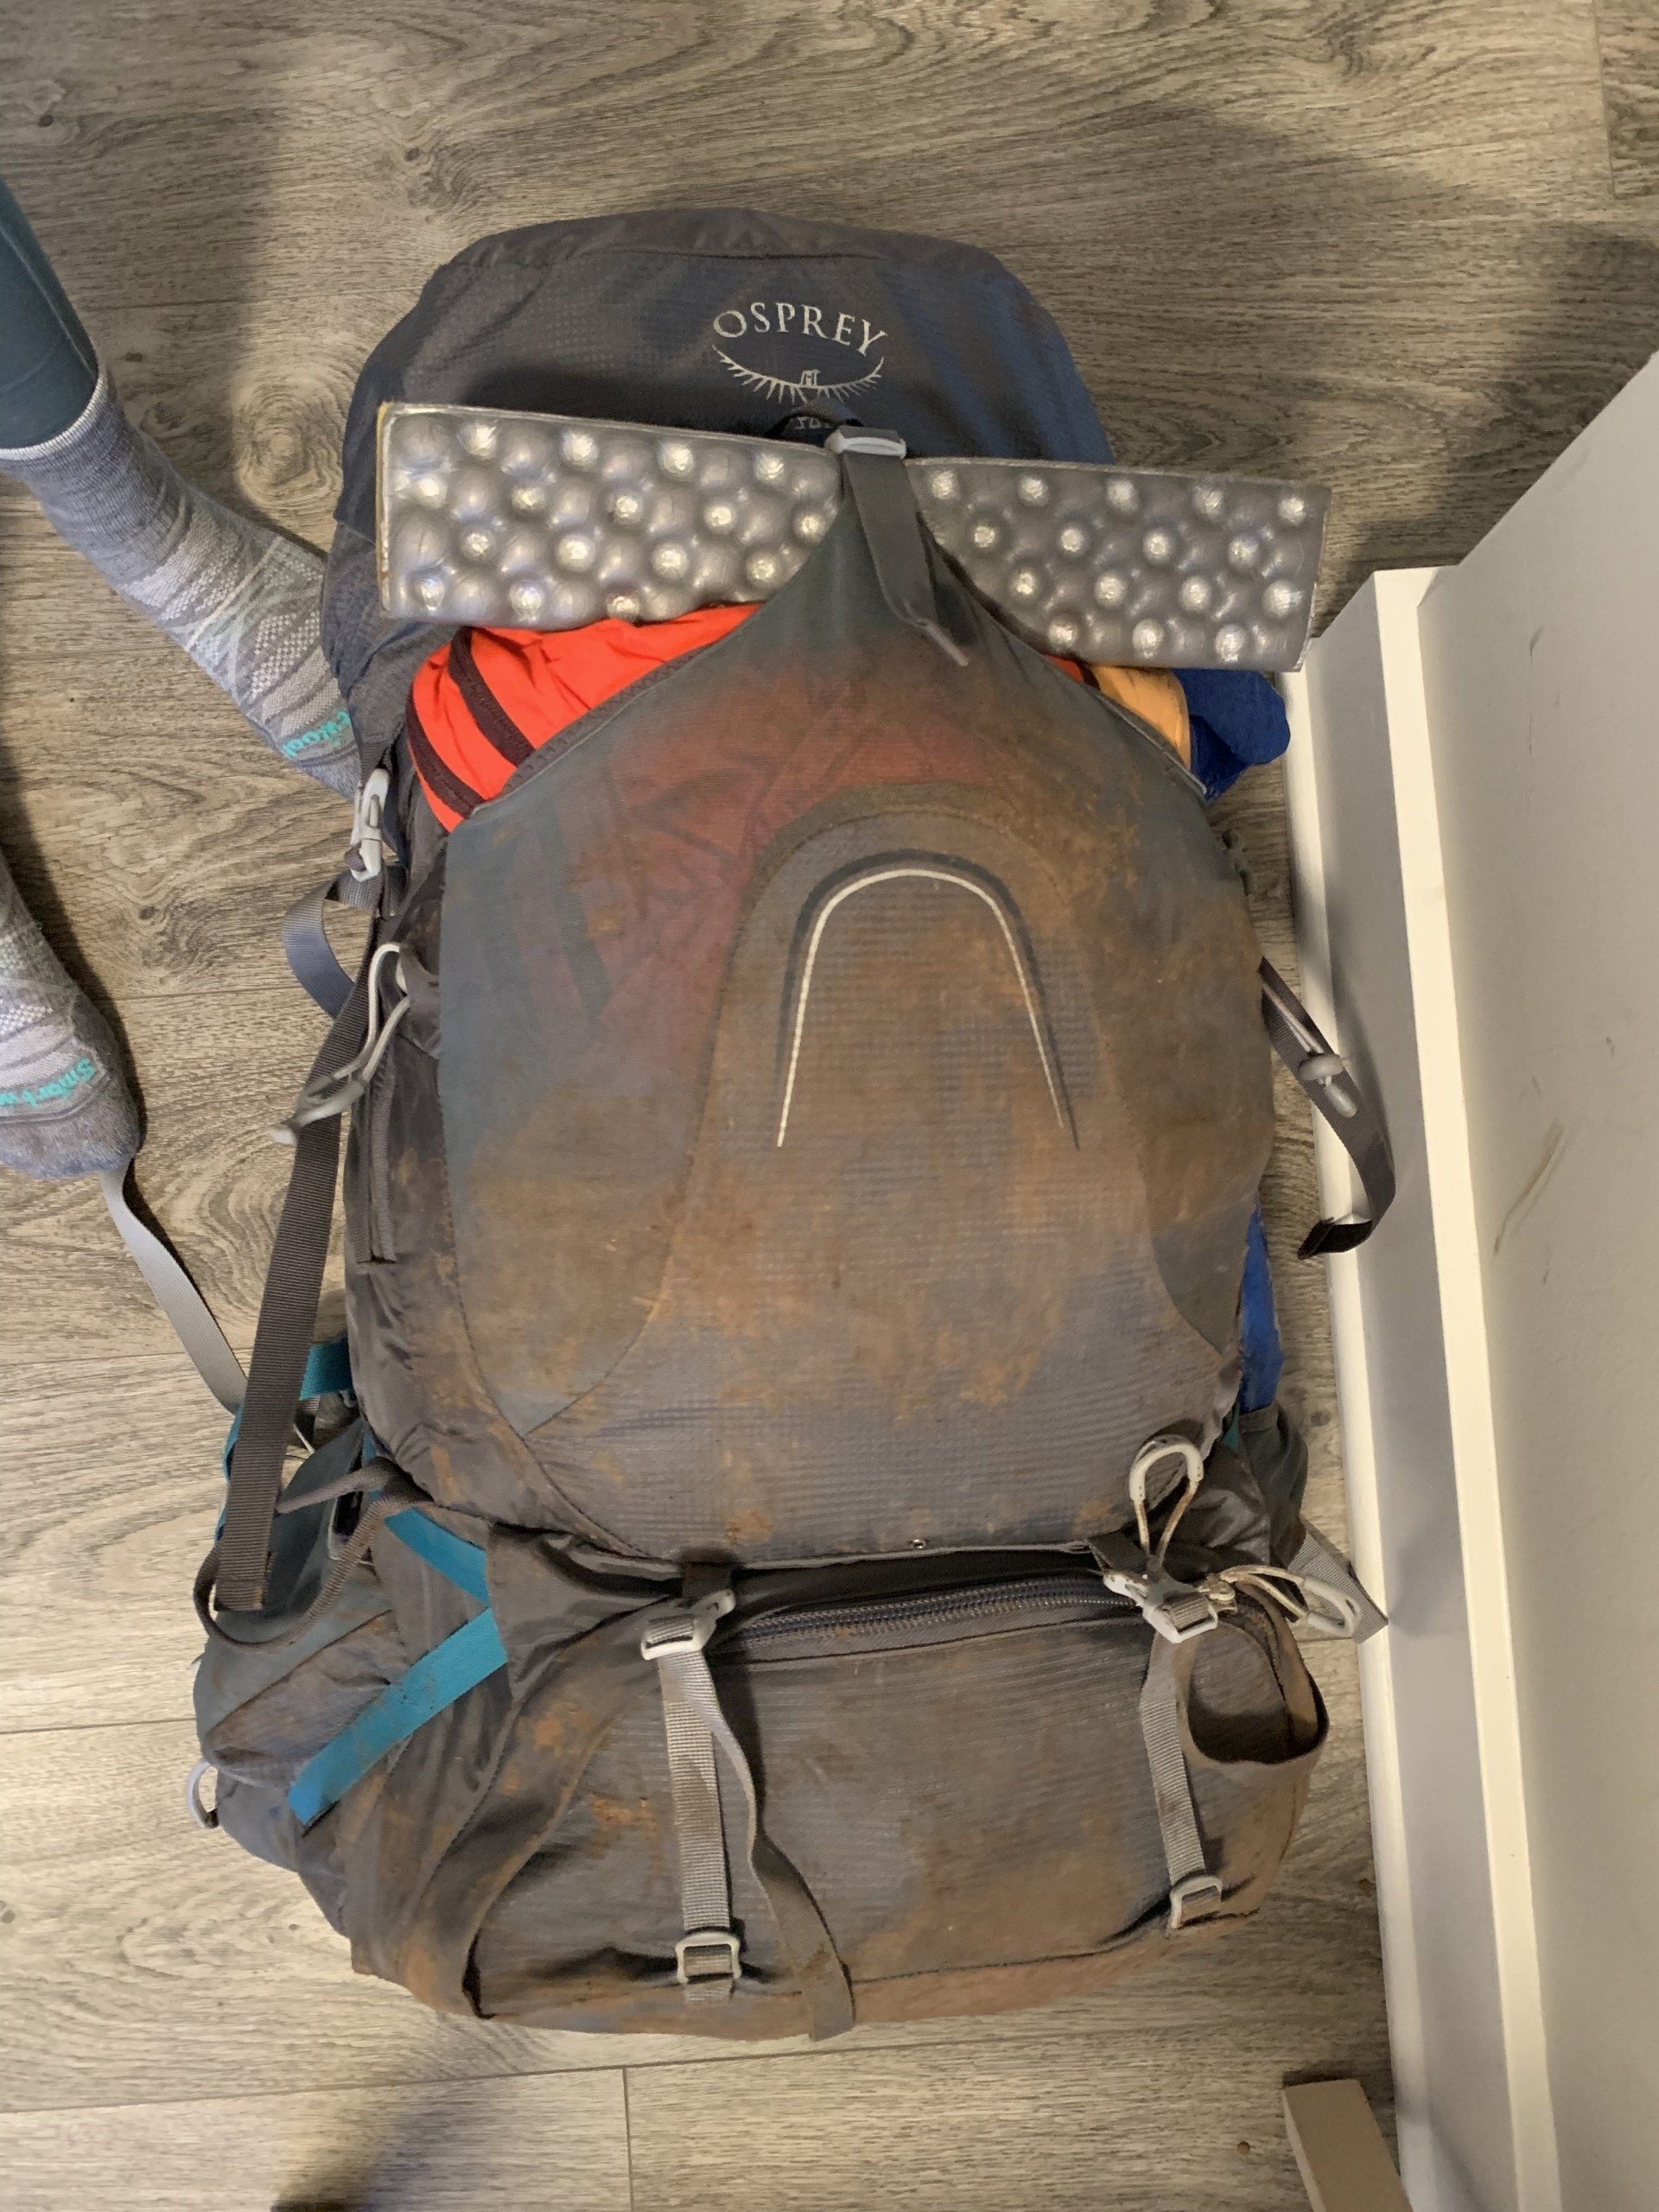 My poor backpack after being dragged on dirt at Golden Ears park, BC, Canada